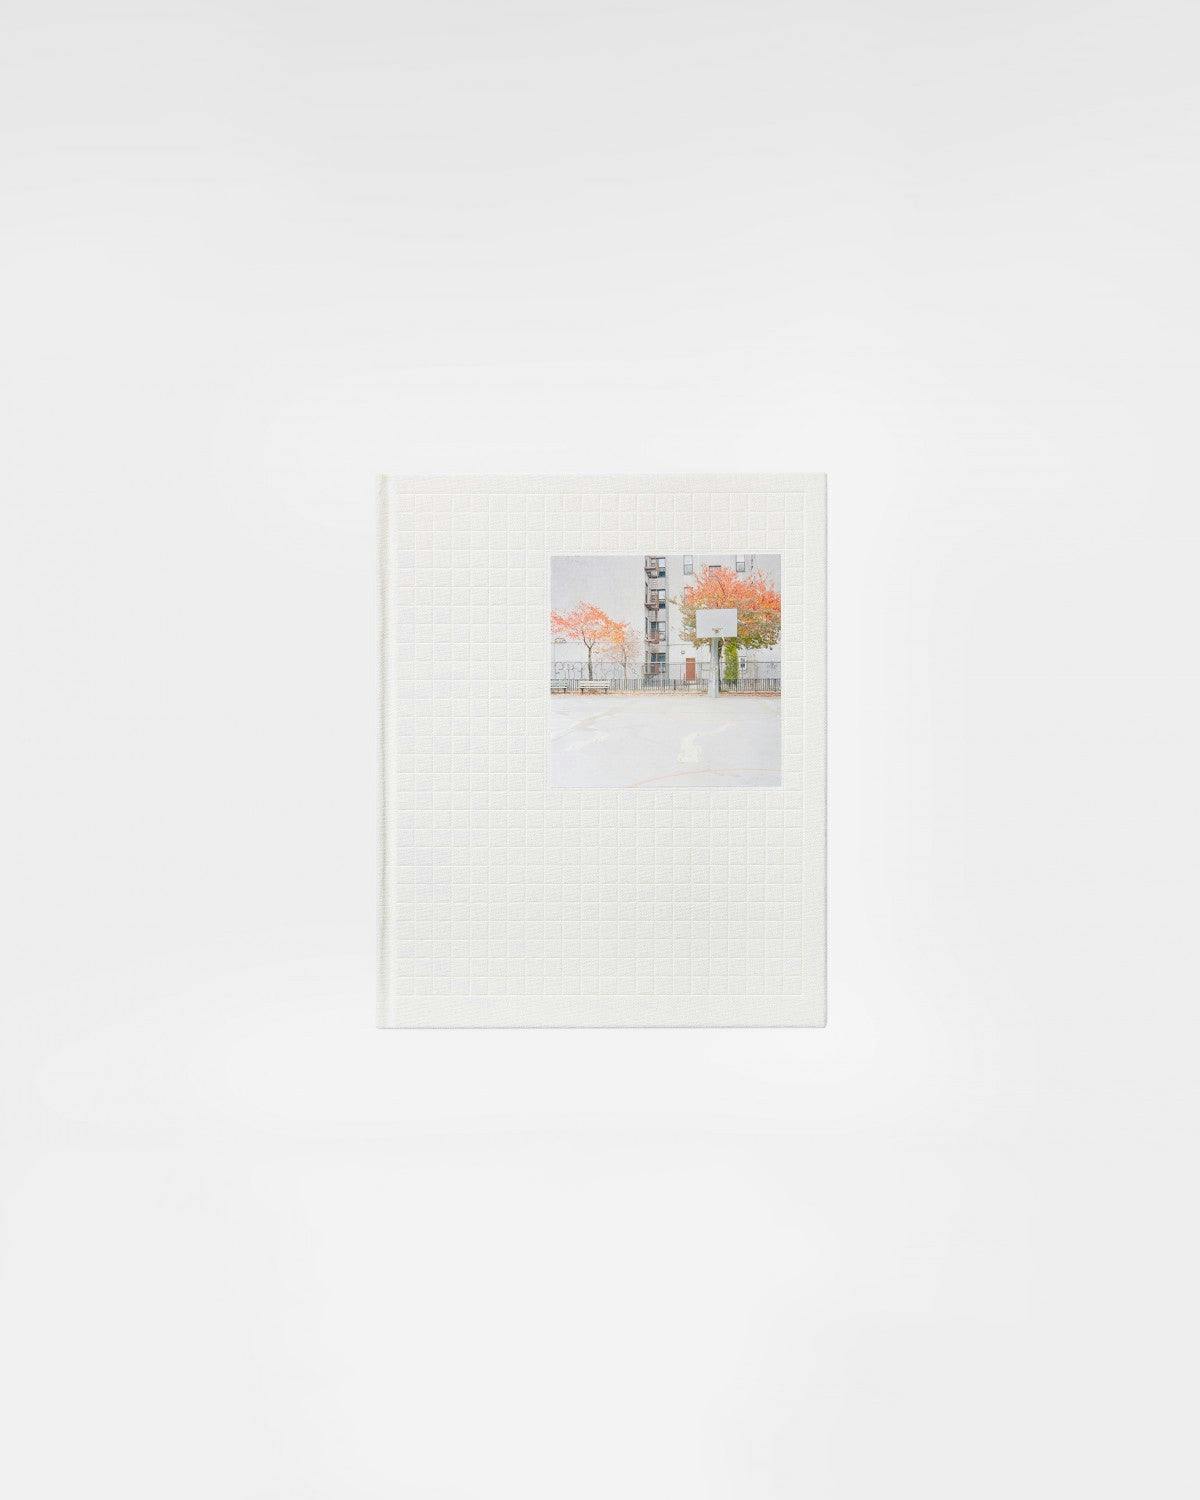 Artist Book by Ward Roberts titled "courts 02".